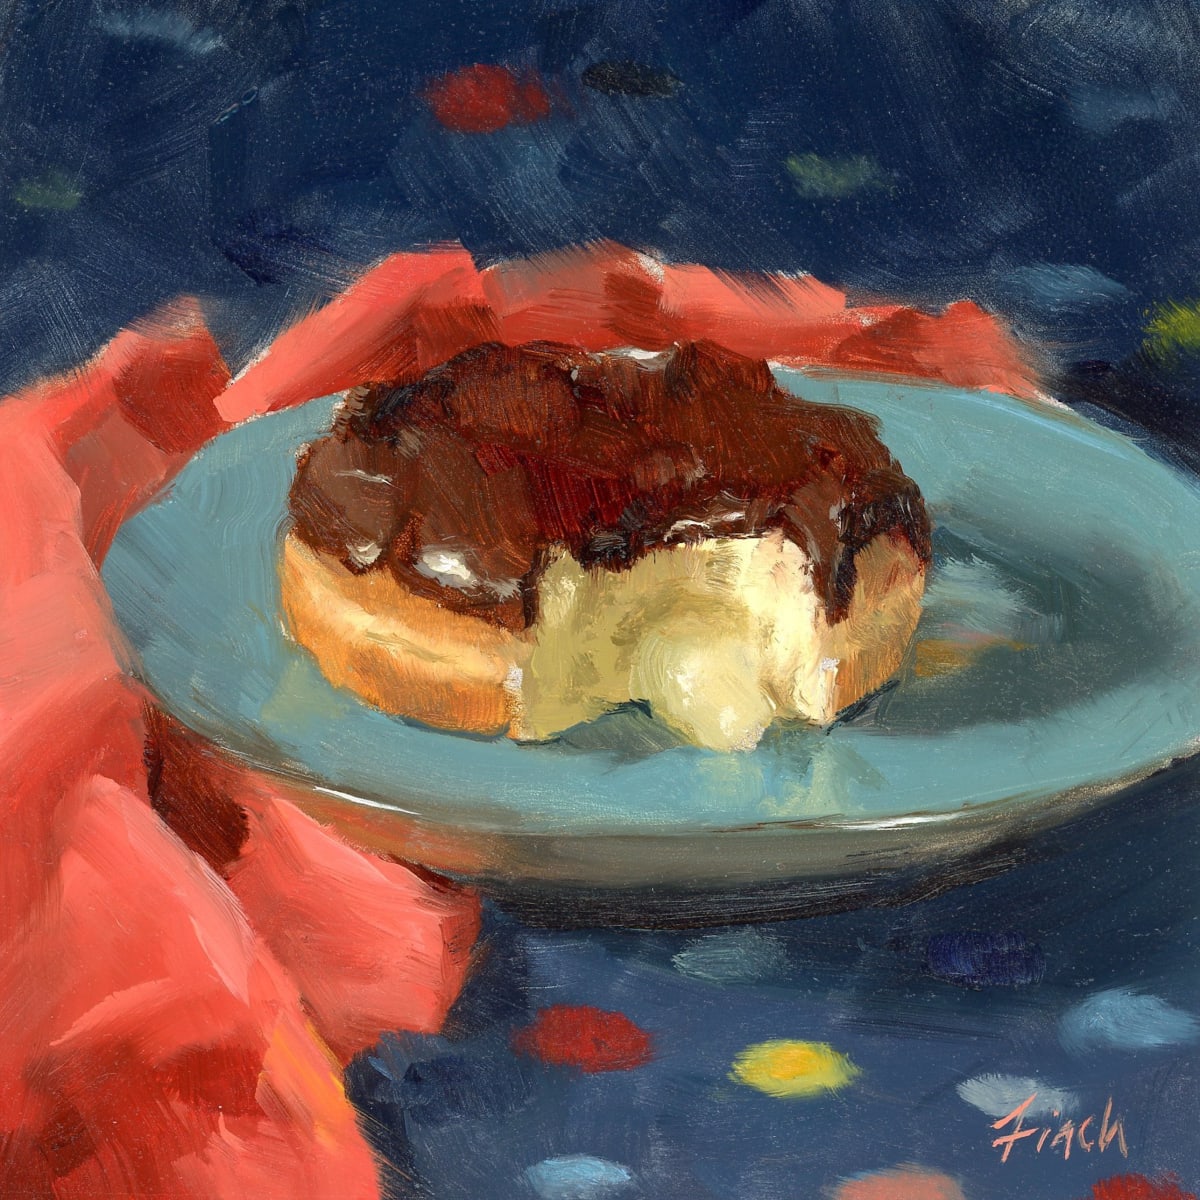 Boston Cream Party by Rebecca Finch  Image: A friend recently confessed she went through Dunkin Donut's drive thru and after ordering a coffee found herself adding a Boston Cream Donut to the order that was unusual for her. Turns out she had just seen this painting posted on Facebook earlier that day. I take full responsibility for the extra calories.